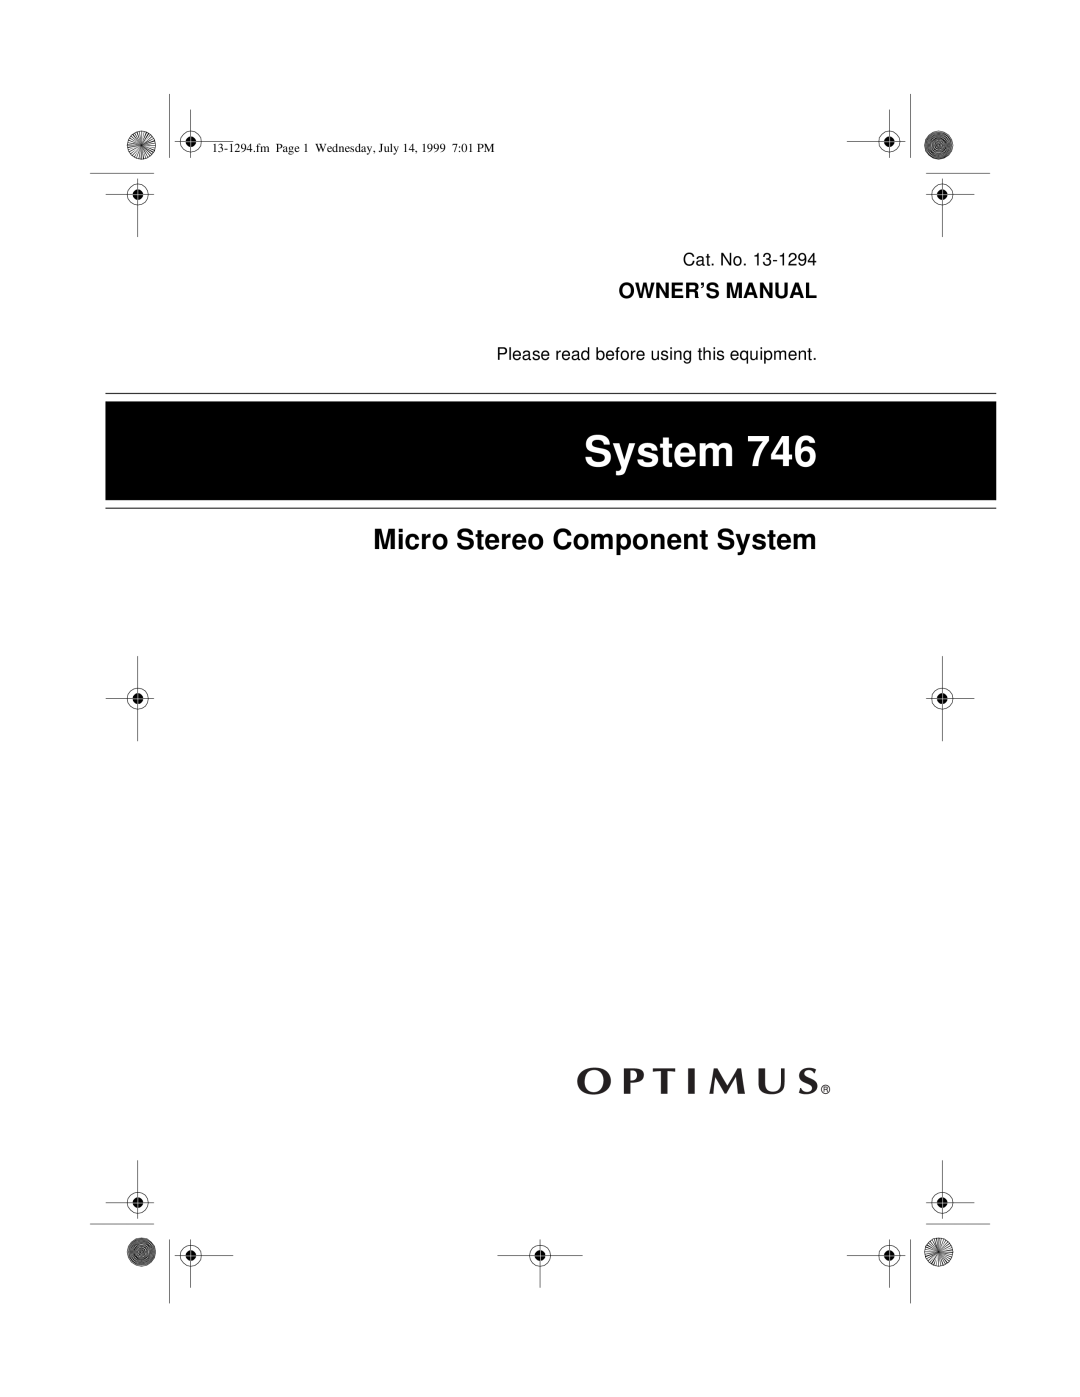 Optimus SYSTEM 746 owner manual Micro Stereo Component System, fmPage 1 Wednesday, July 14, 1999 7 01 PM 